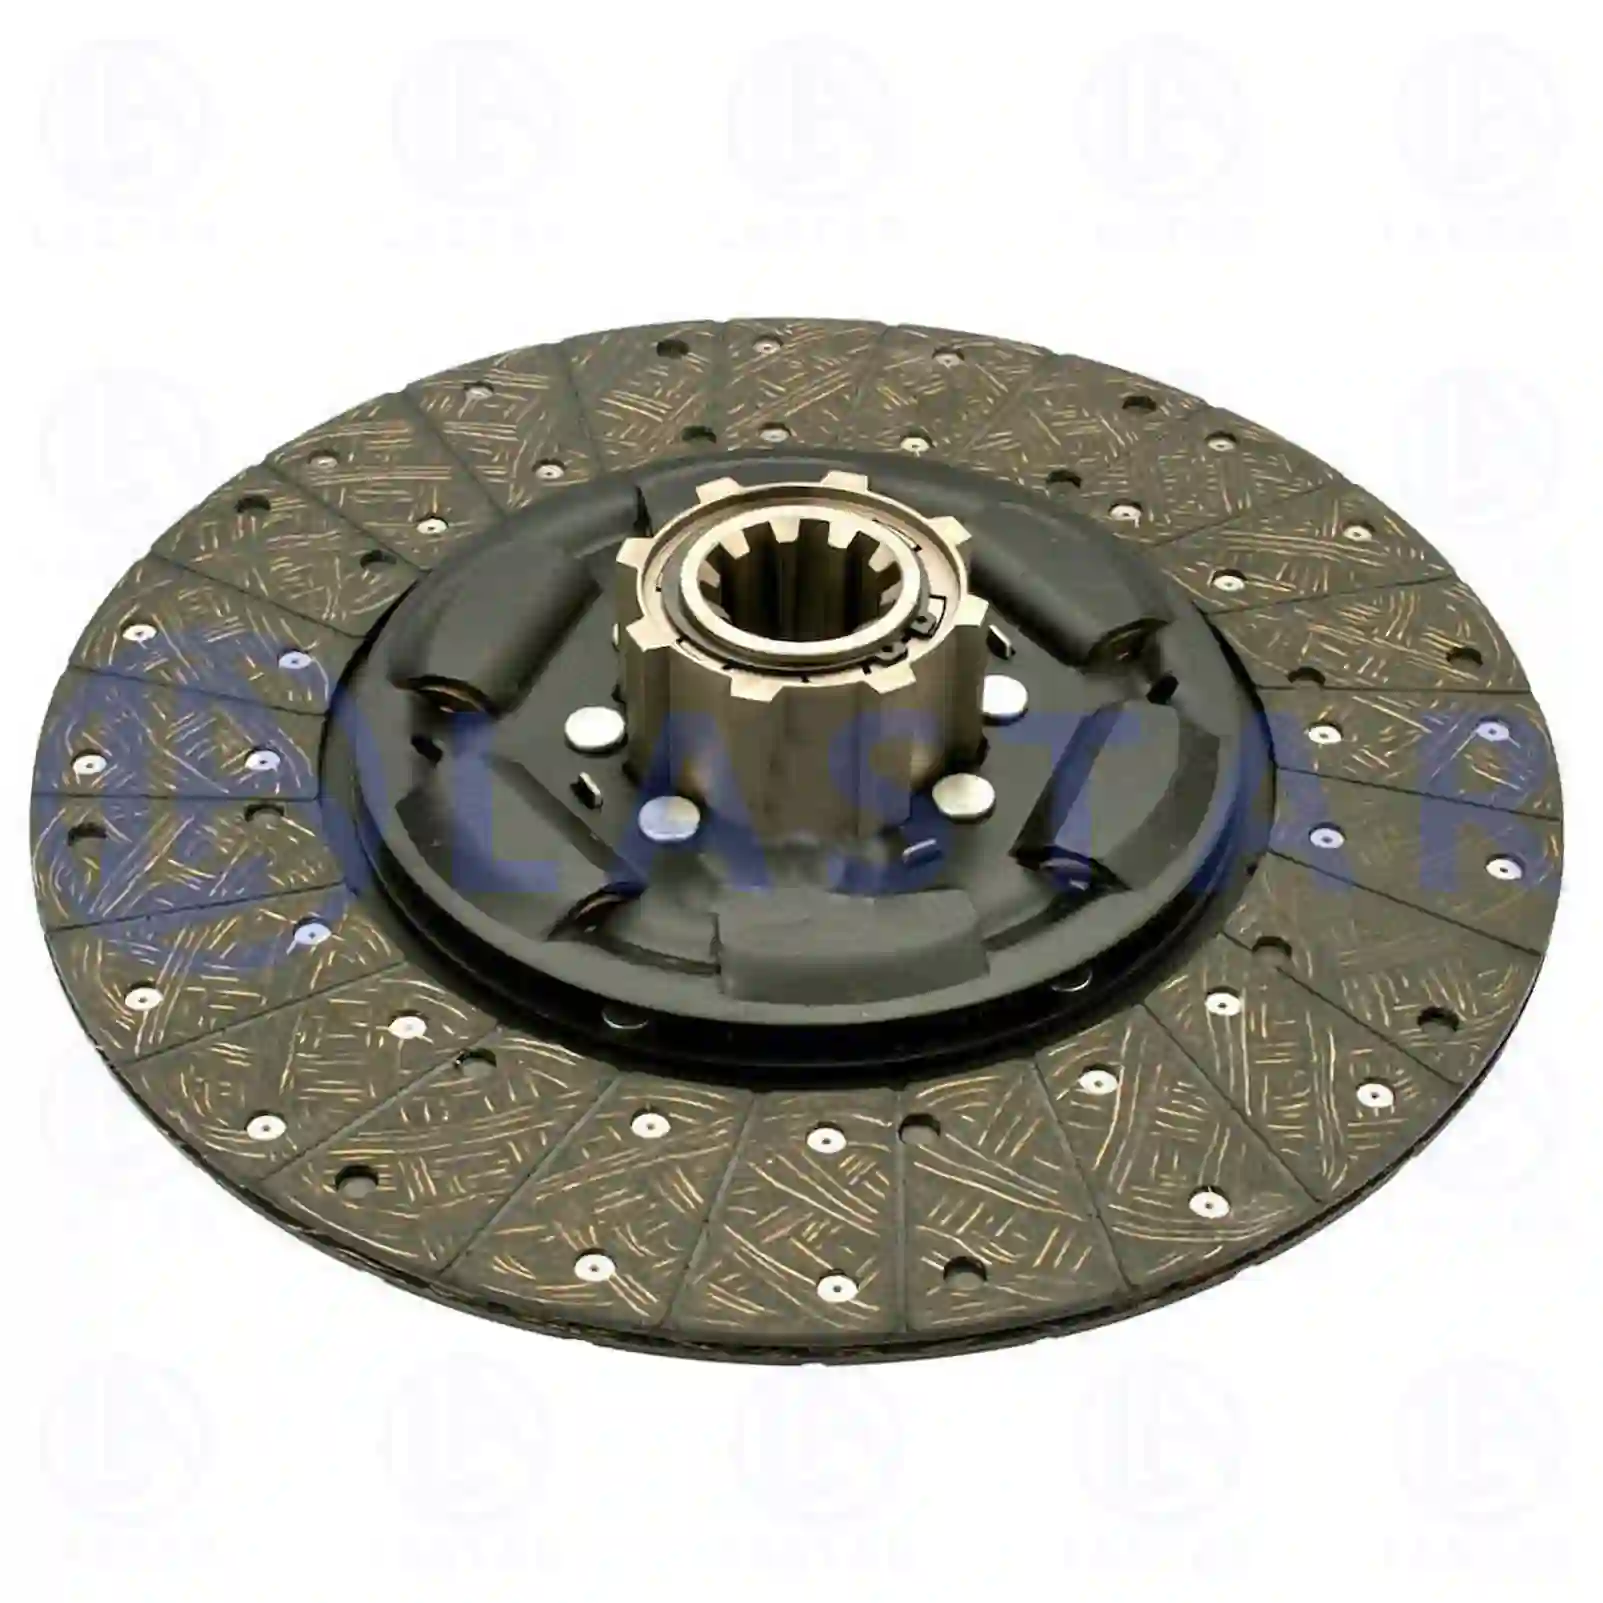 Clutch disc, 77721897, 04226846, 81303010392, 81303010539, 81303010566, 81303019392, 81303019539, 81303019566, 0182508603, 0182508803, 10720699, ZG30295-0008 ||  77721897 Lastar Spare Part | Truck Spare Parts, Auotomotive Spare Parts Clutch disc, 77721897, 04226846, 81303010392, 81303010539, 81303010566, 81303019392, 81303019539, 81303019566, 0182508603, 0182508803, 10720699, ZG30295-0008 ||  77721897 Lastar Spare Part | Truck Spare Parts, Auotomotive Spare Parts